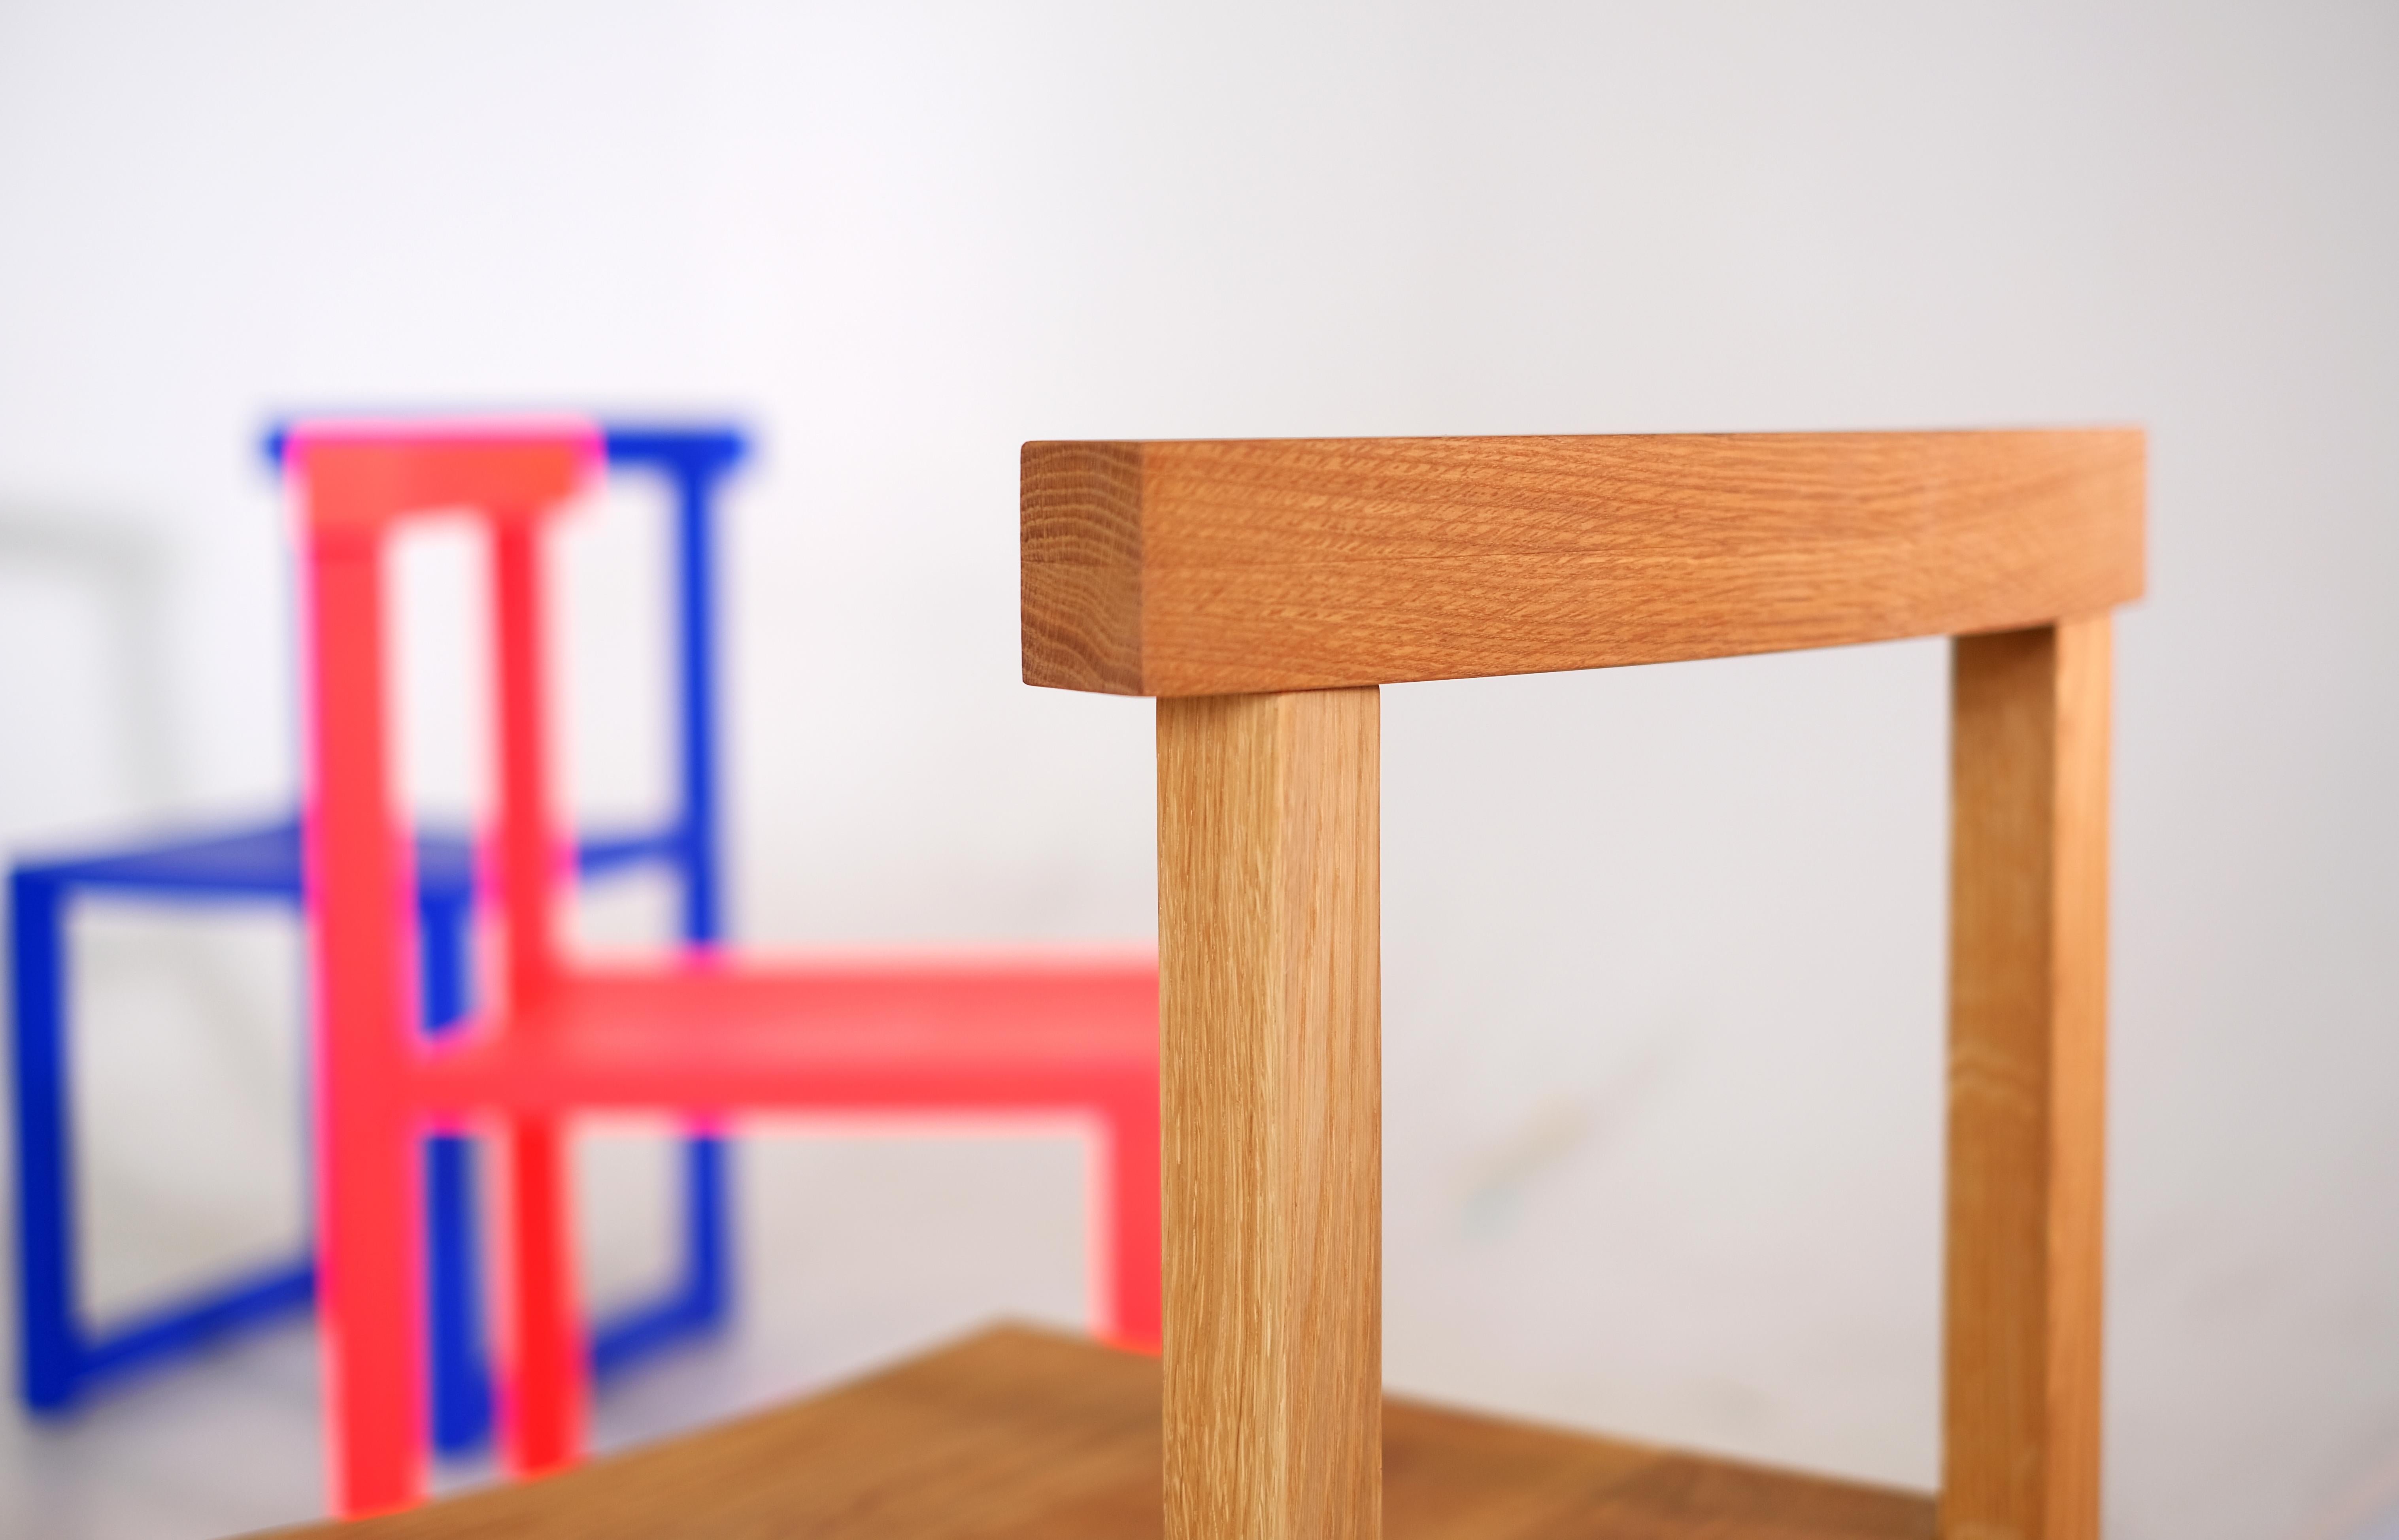 Klein chair. Lacquered solid ash and oiled white oak. Made in Chicago.

Natural White Oak
Matte Fluorescent Red
Satin Black
Matte Ultramarine Blue

Named for the historic, obsessive, pursuit of idealism, pigment, and beauty of artist Yves Klein.